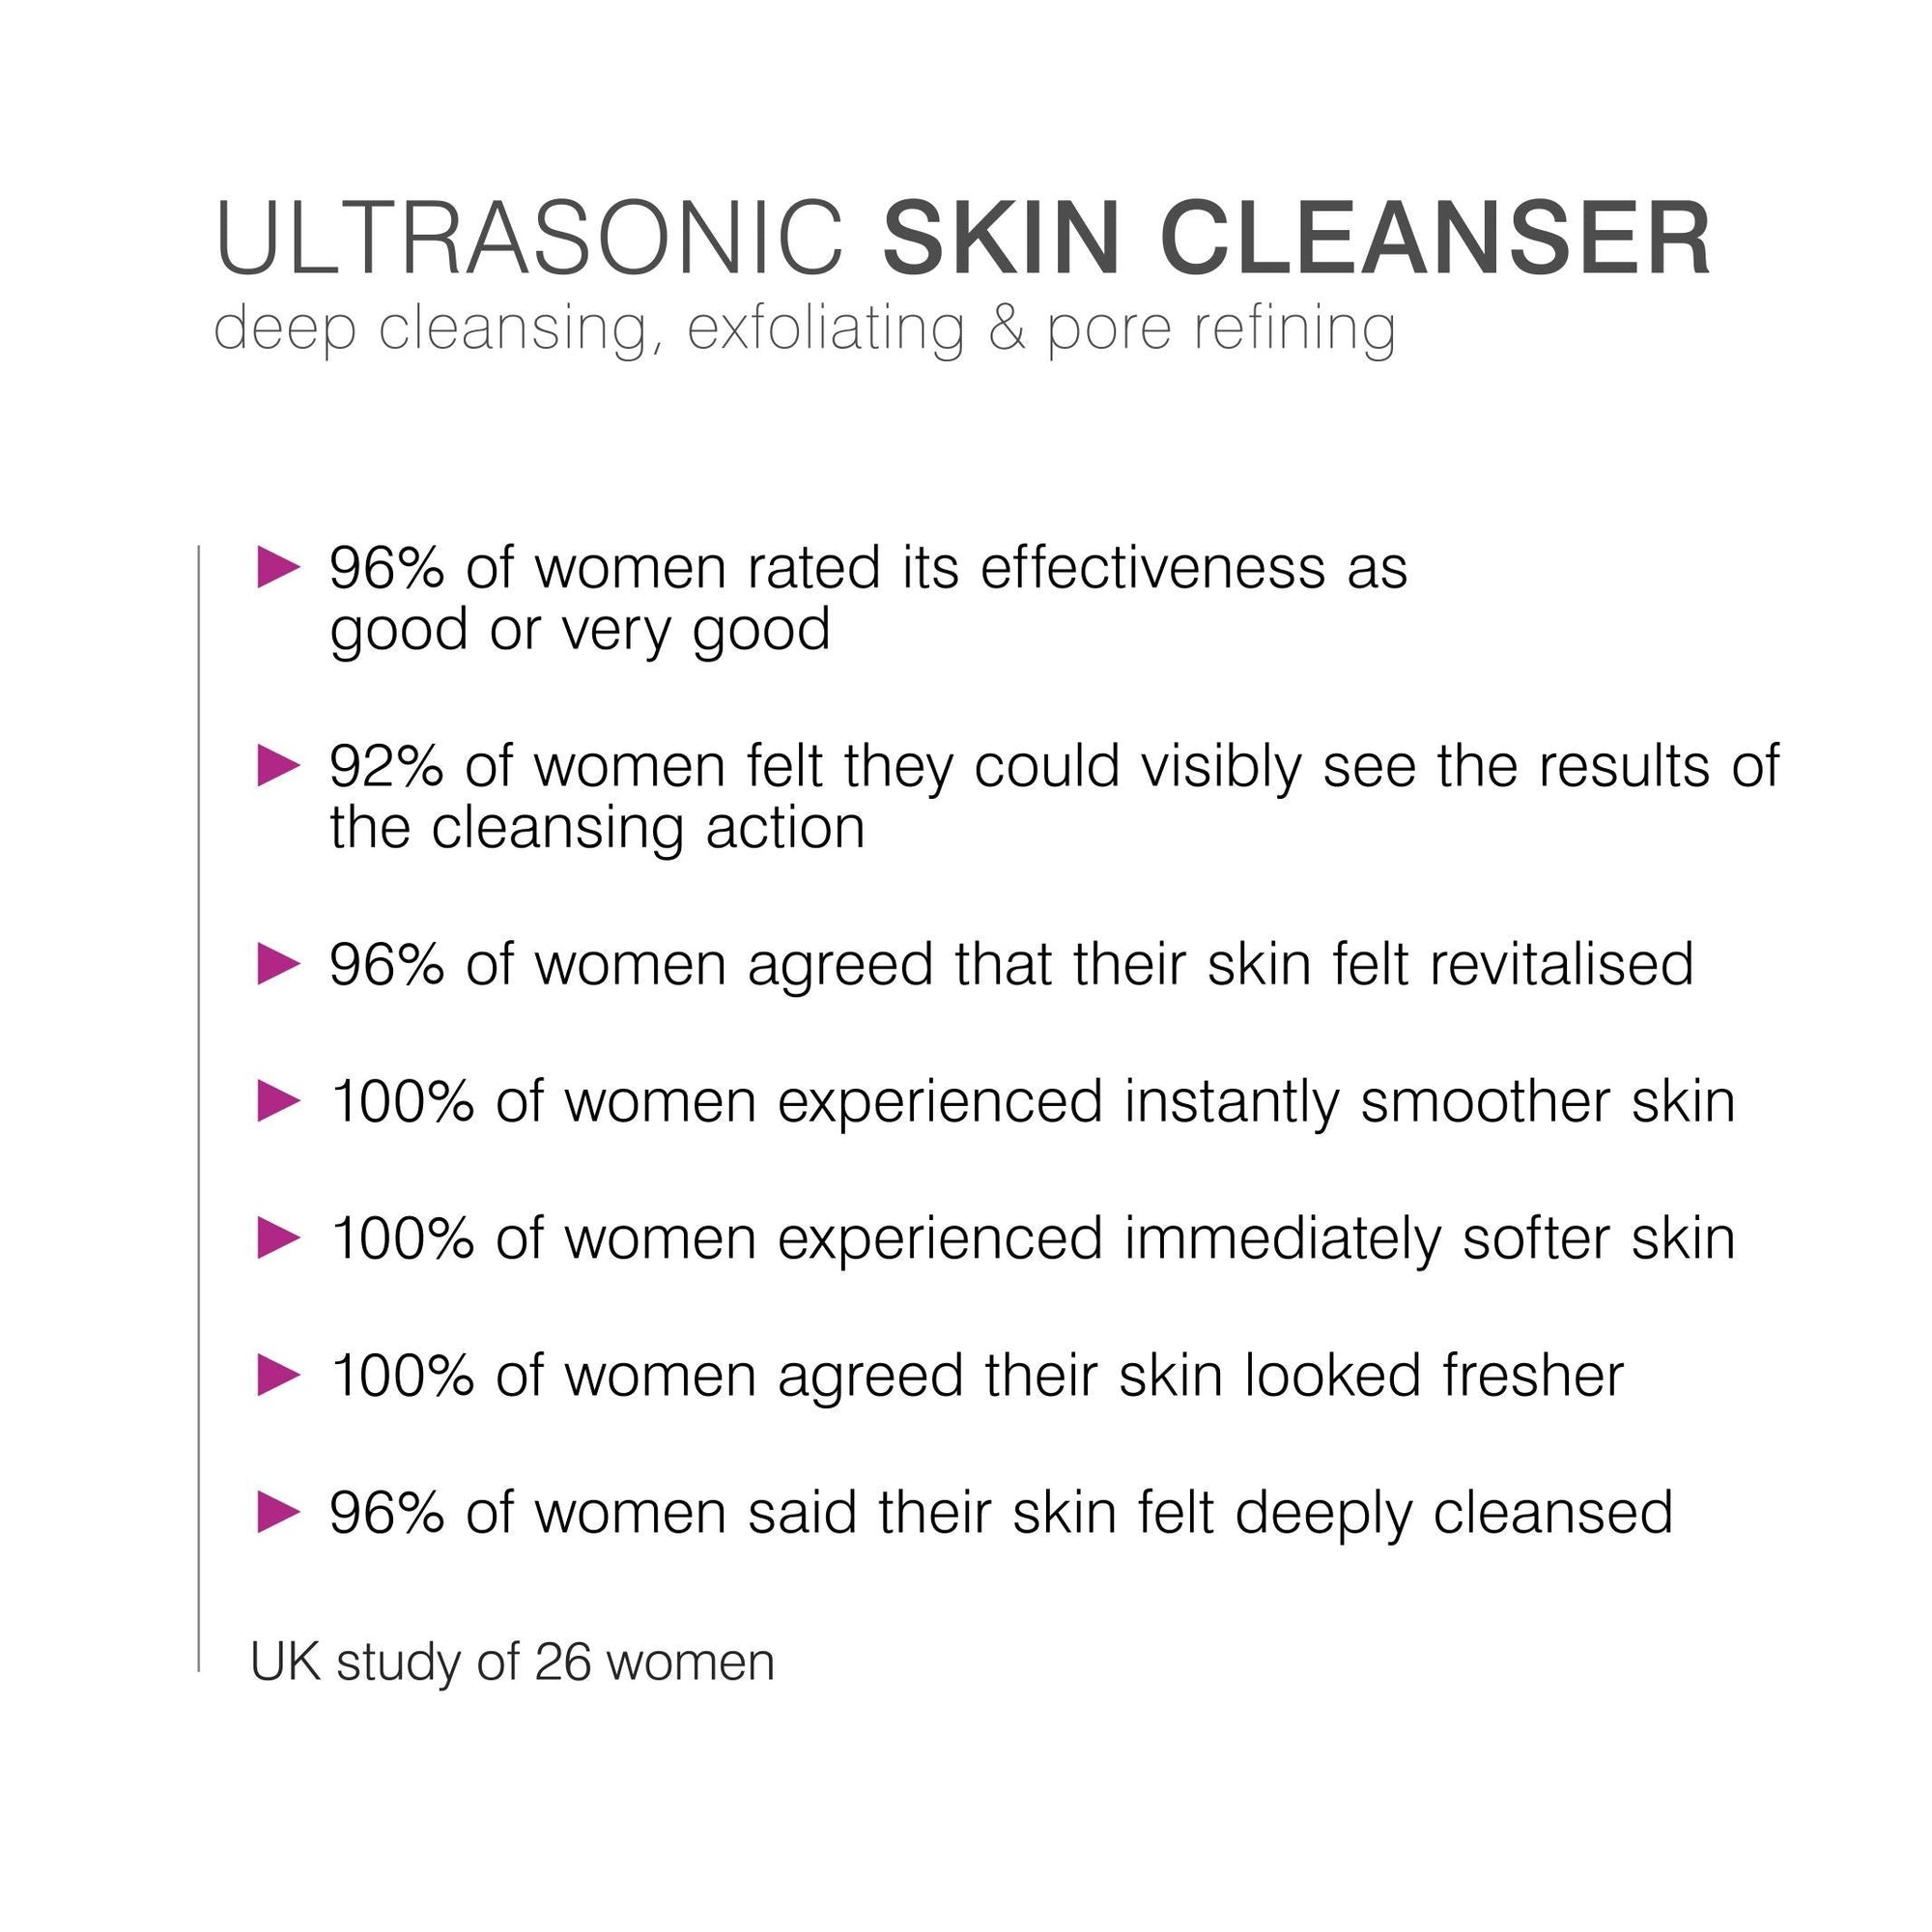 bulleted text listing features of ultrasonic facial 96% of women rated its effectiveness as good or very good 92% of women felt they could visibly see the results of the cleansing action 96% of women agreed their skin felt revitalised 100% of women experienced instantly smoother skin 100% of women experienced immediately softer skin 100% of women agreed their skin looked fresher 96% of women said their skin felt deeply cleansed 